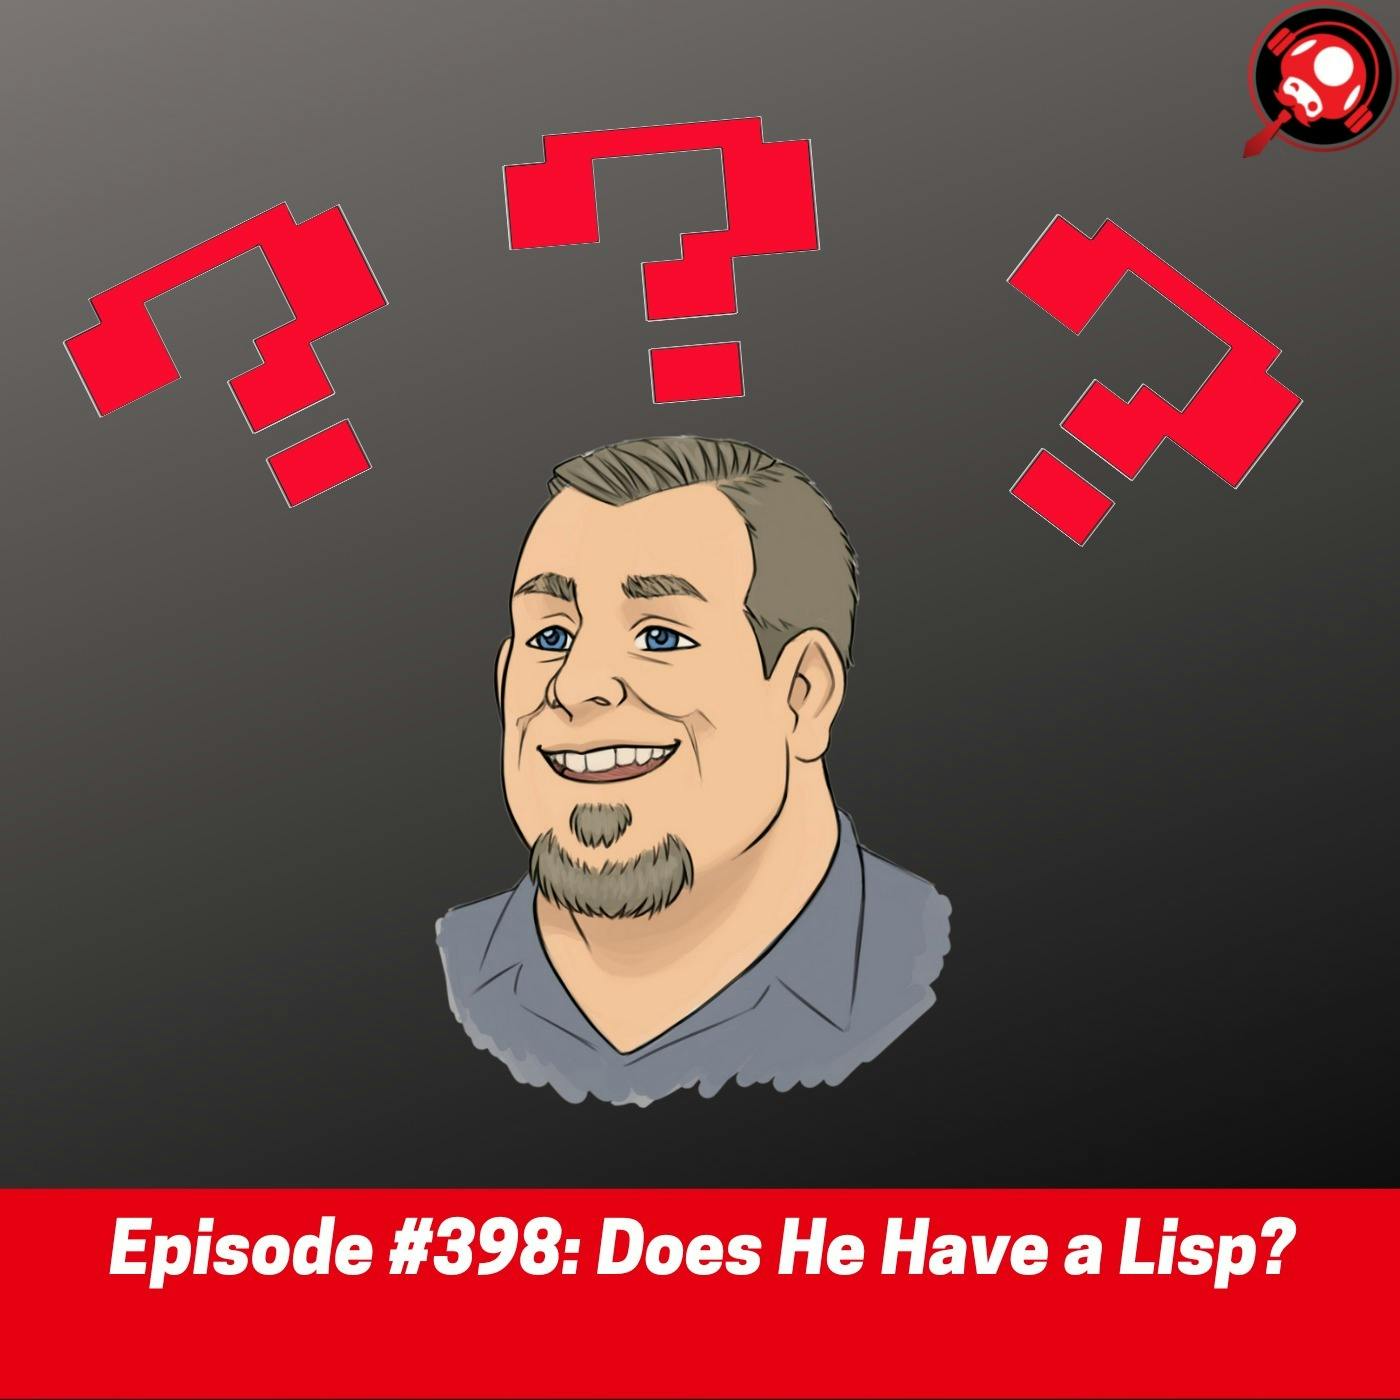 #398: Does He Have a Lisp?